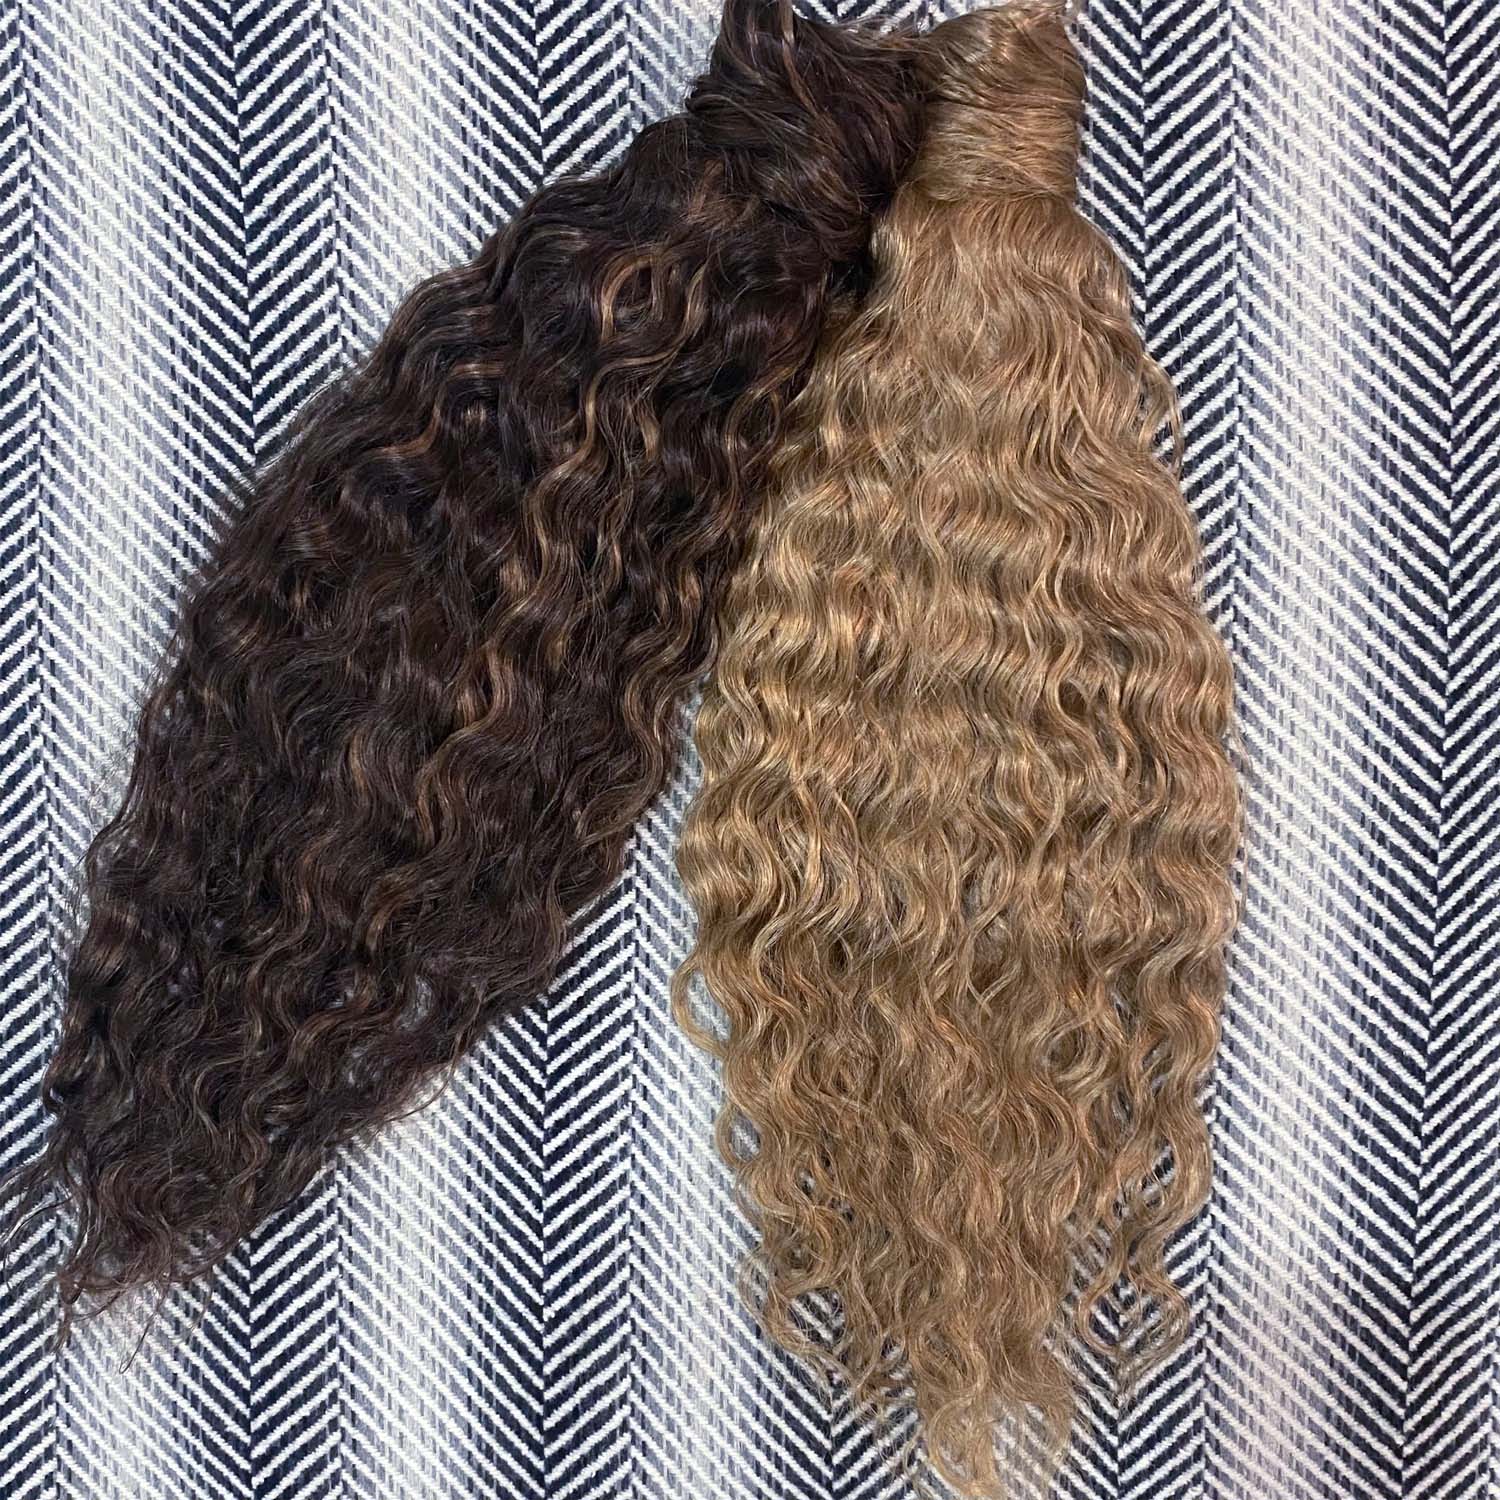 Curly Ponytail Human Hair Extensions #16 Natural Blonde